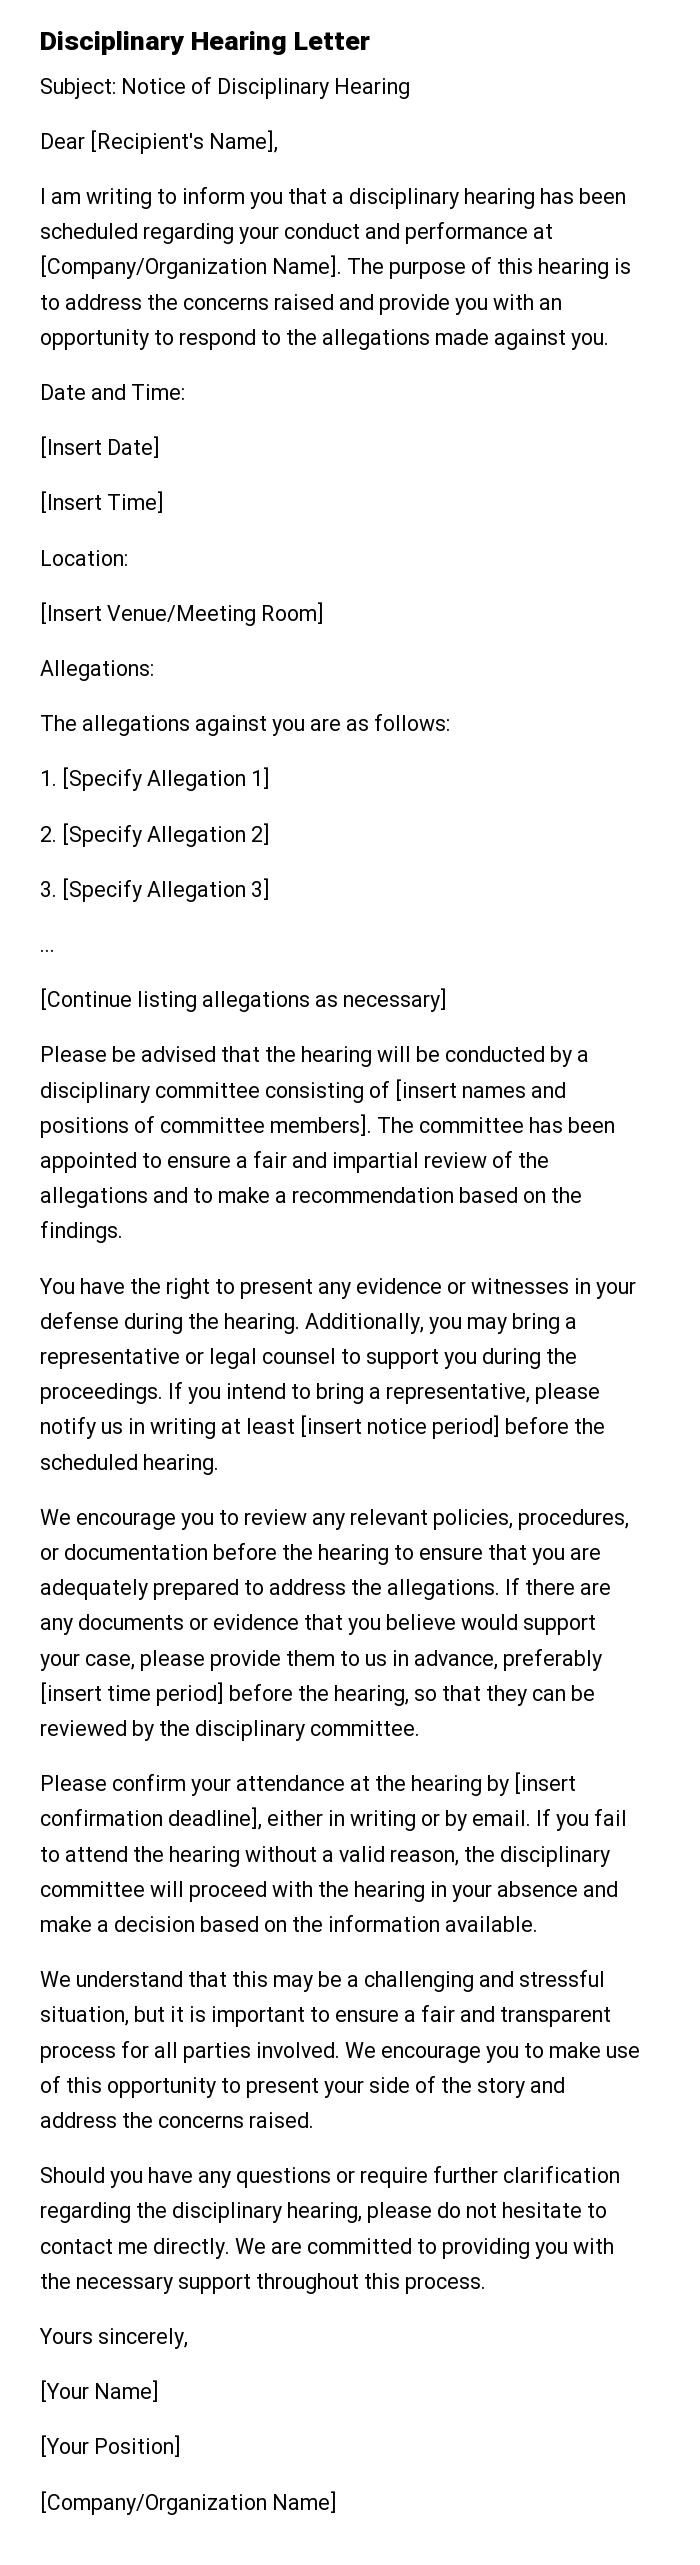 Disciplinary Hearing Letter